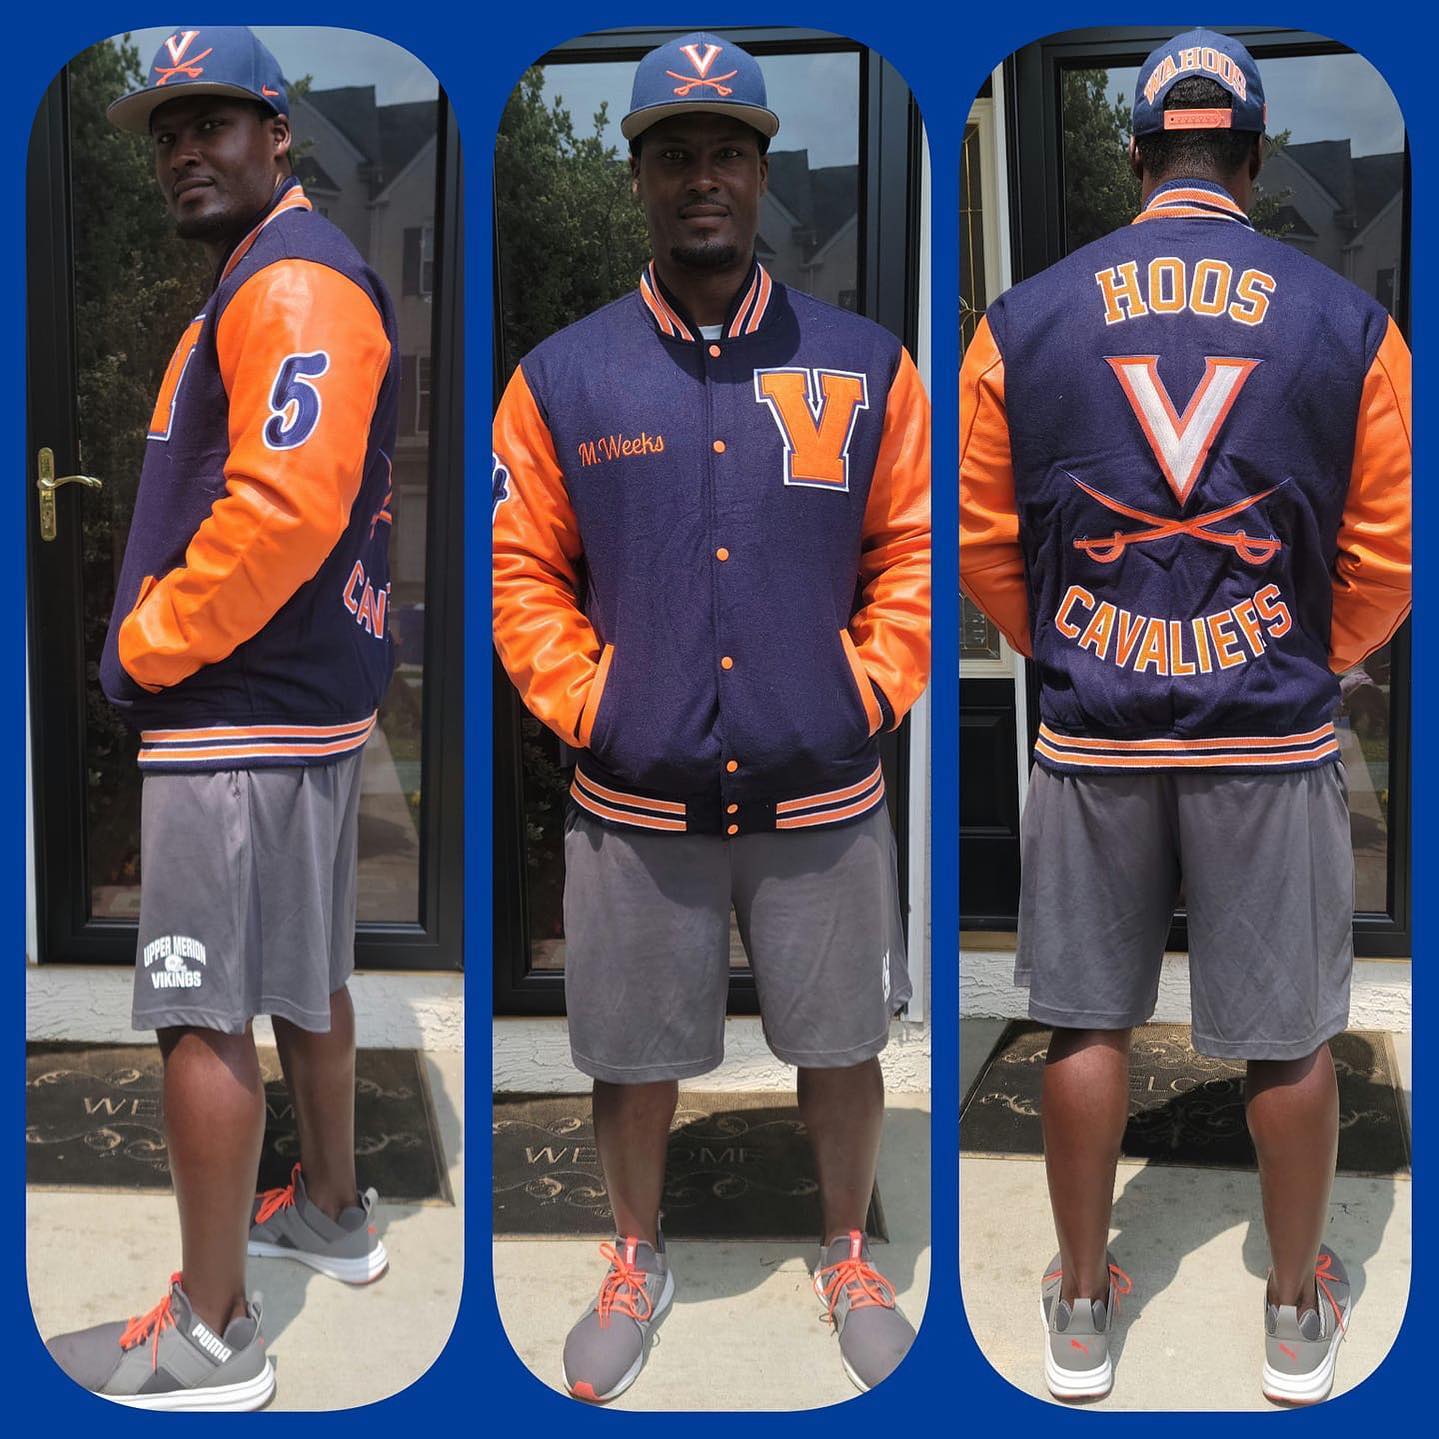 Talk about binging my vision to life! I have wanted this jacket made for a long time and Stagwears went above and beyond to make it happen. The production team did a fantastic job, the communication with customer support was second to none. I recommend Stagwears to anyone looking for a quality product. Thank you Stagwear for creating my dream college varsity jacket!!!!

#customerexperience #stagwears #varsityjacket #lettermanjacket